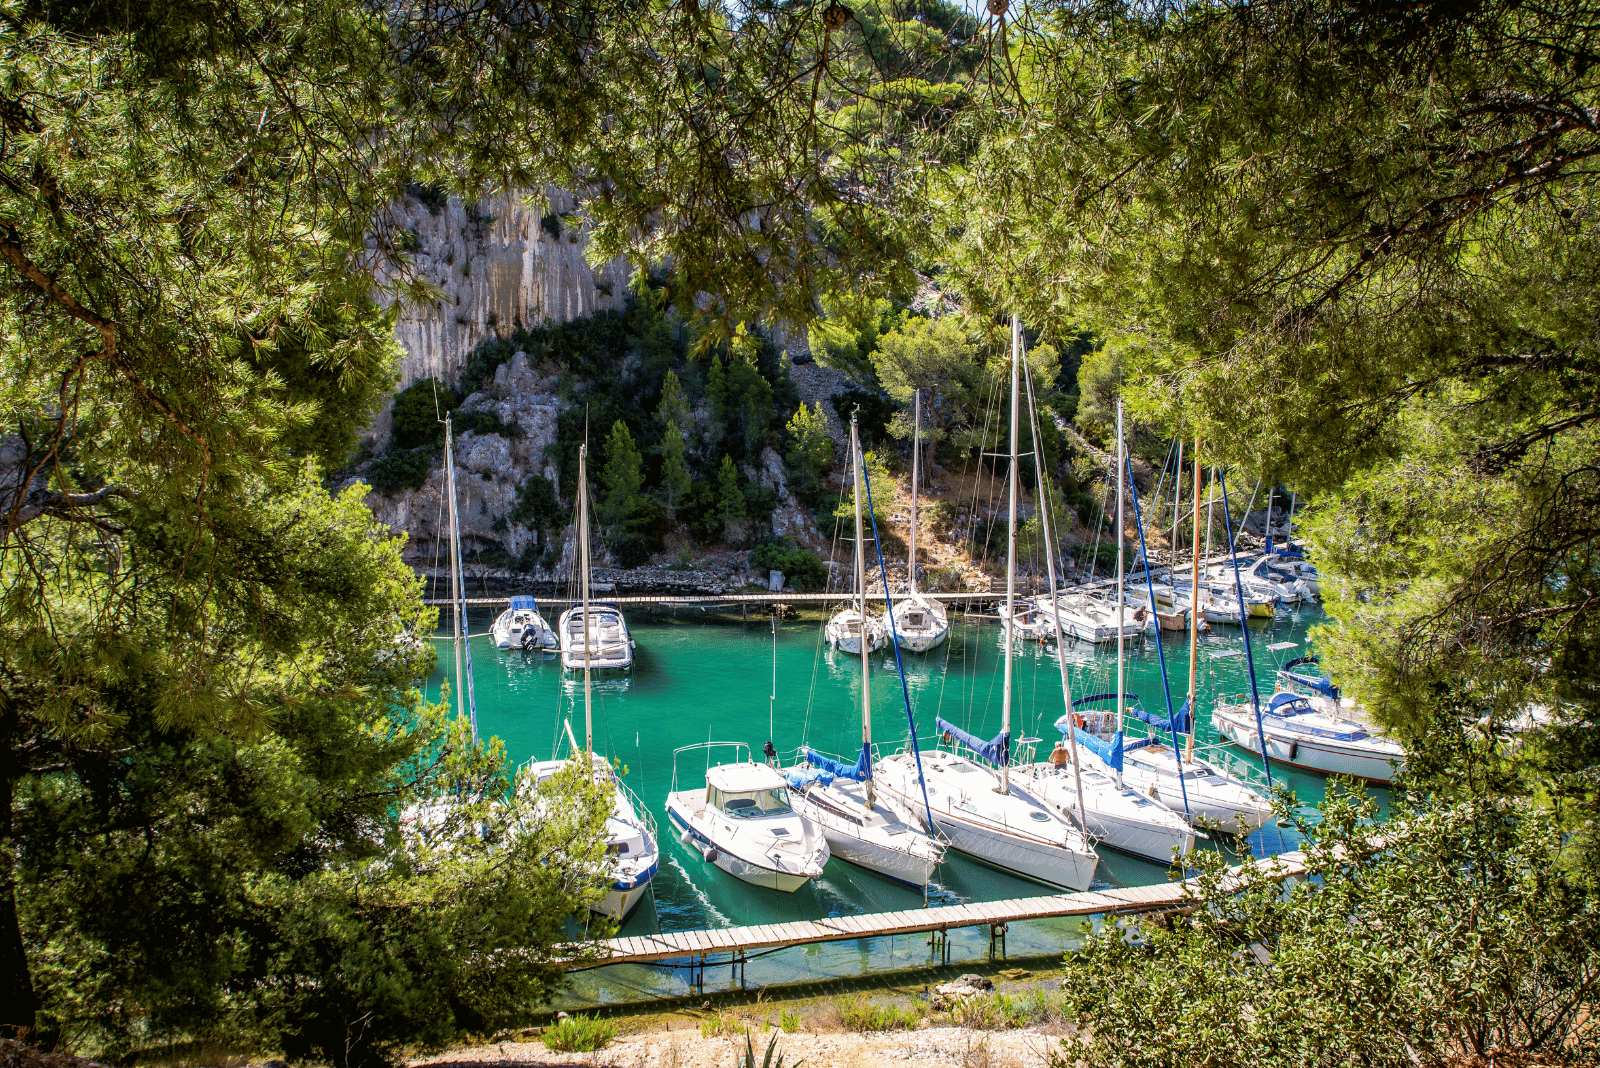 Take a boat trip through the Calanques